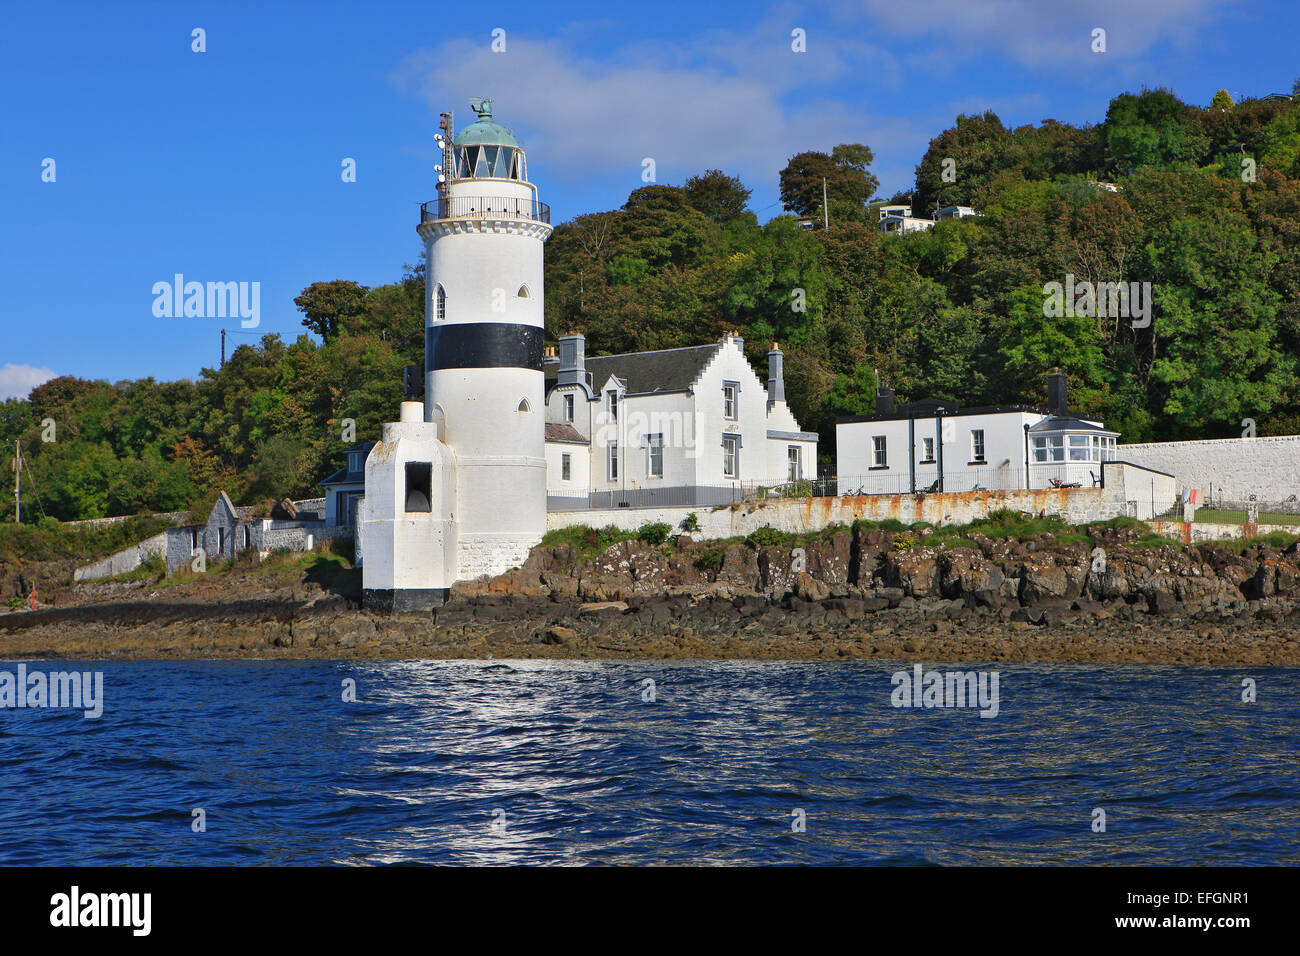 Cloch Lighthouse on the Firth of Clyde in Scotland between Gourock and Inverkip Stock Photo